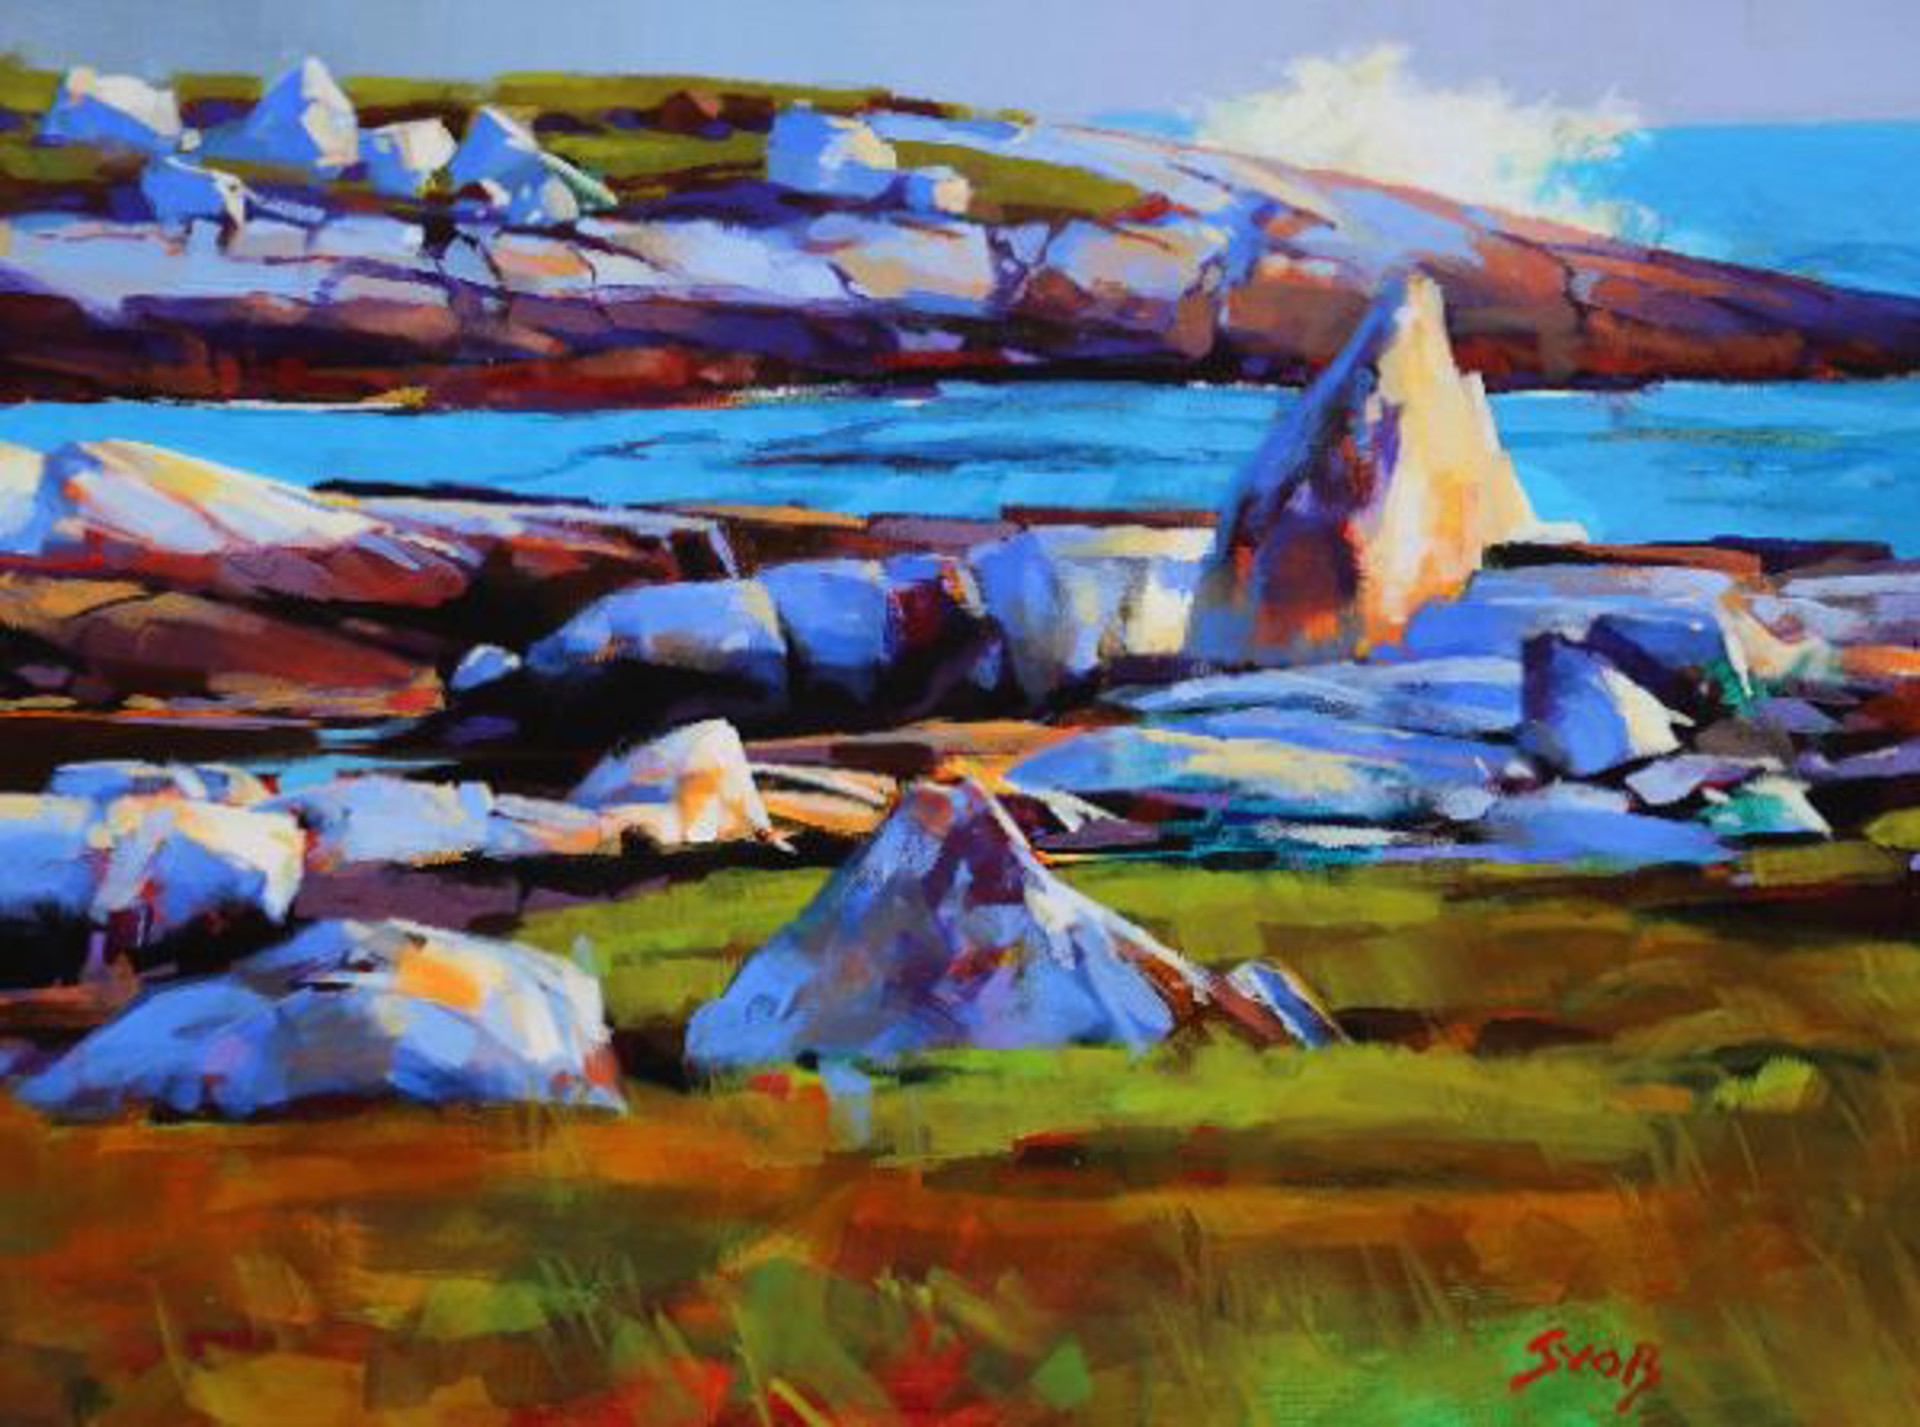 Swissair Sentinels (Peggys Cove) by MIKE SVOB